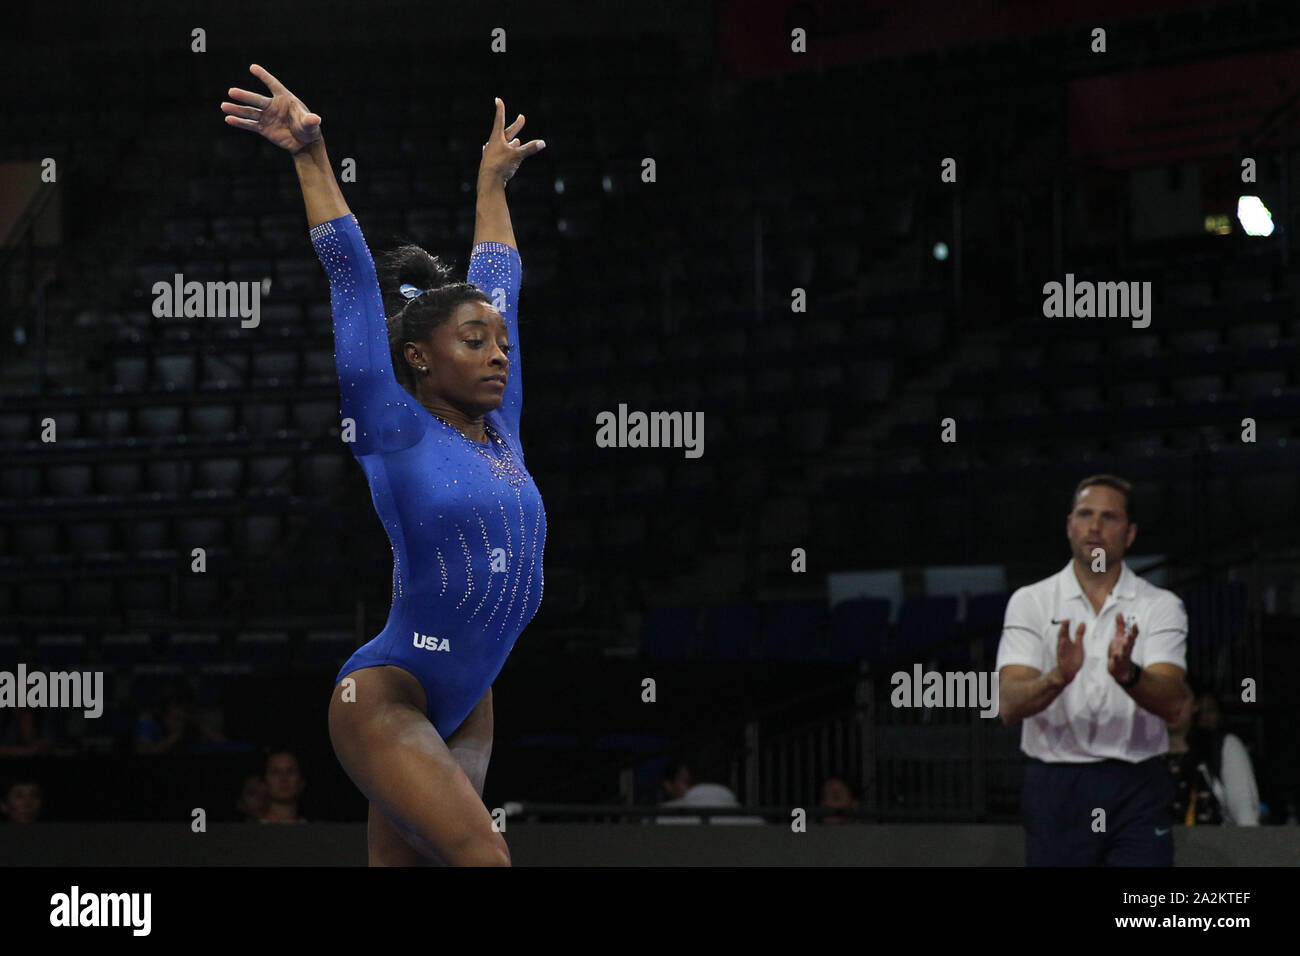 Stuttgart, Germany. 1st Oct, 2019. Gymnast Simone Biles from the USA during the podium training day at the 2019 World Artistic Gymnastics Championships in Stuttgart, Germany. Biles after landing a double-twisting double back dismount, a skill she hopes will be named after her, while coach Laurent Landi watches. Melissa J. Perenson/CSM/Alamy Live News Stock Photo